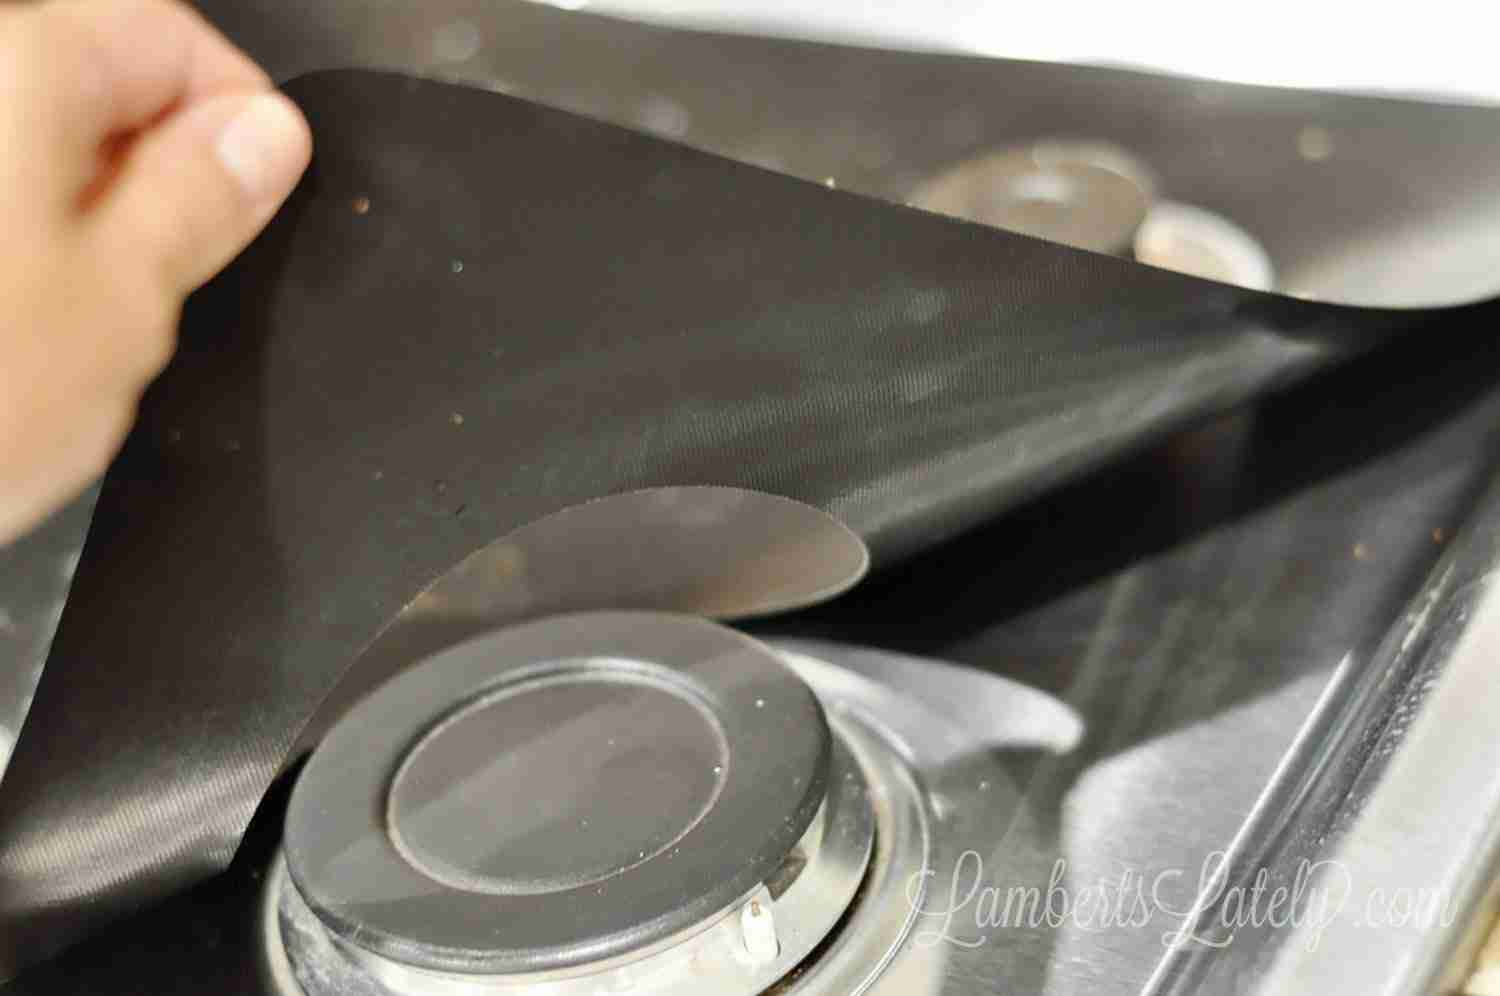 This post shows how to make a DIY Stove Splatter Guard - perfect for keeping kitchens/gas stovetops clean! This guard covers a gas stove to protect stainless steel from spills and stains.